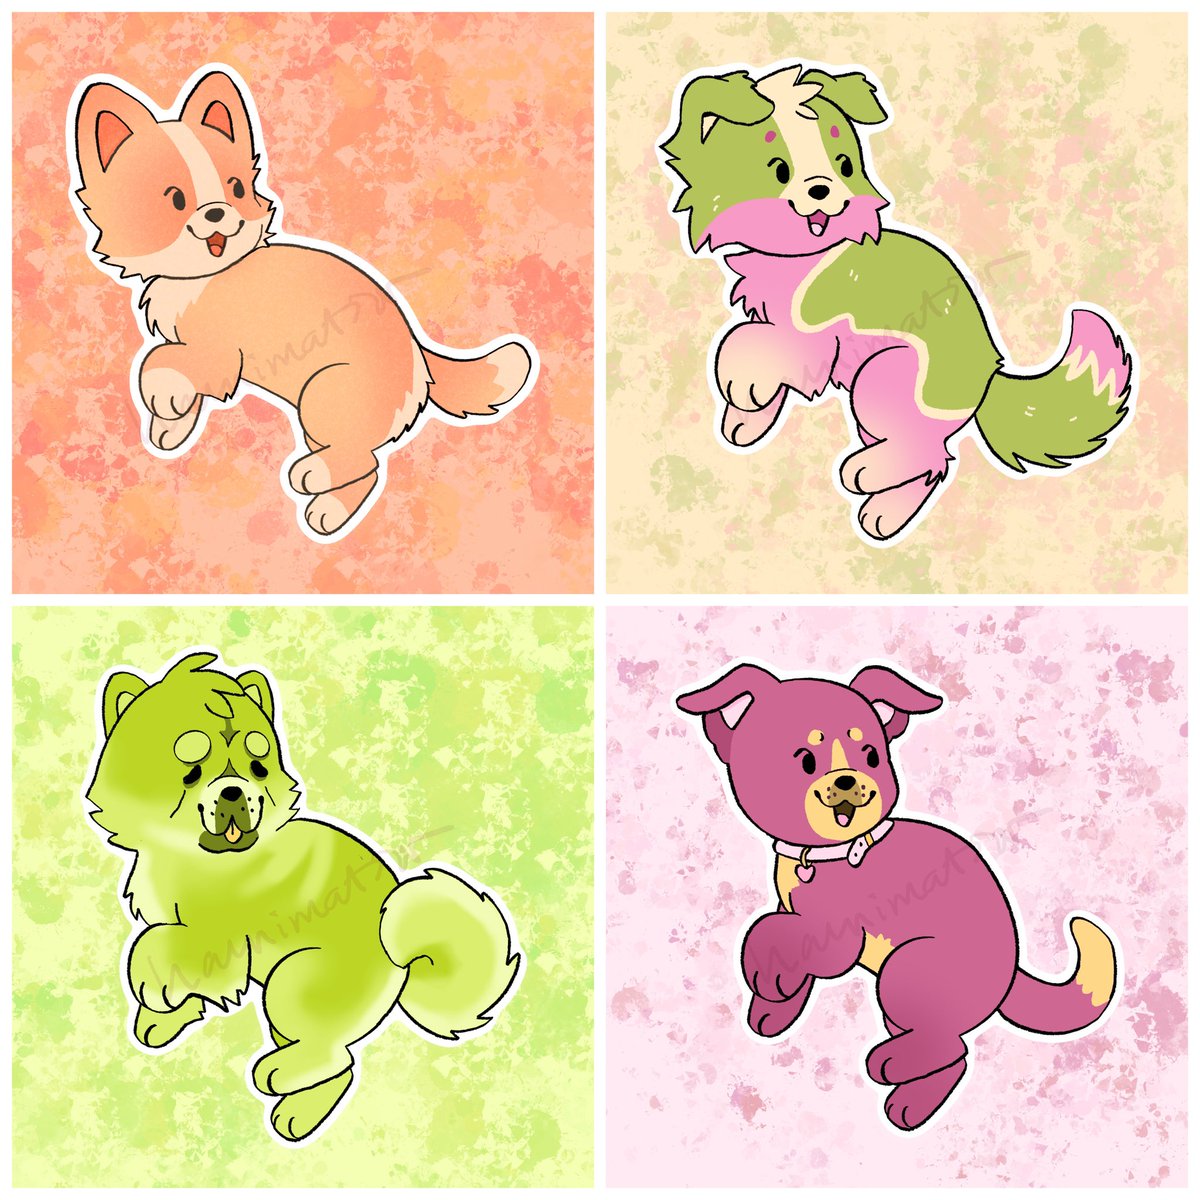 additionally! peach corgi, guava collie, lime chow chow, and passion fruit pittie! gonna put these up on kofi today probably for v cheap!